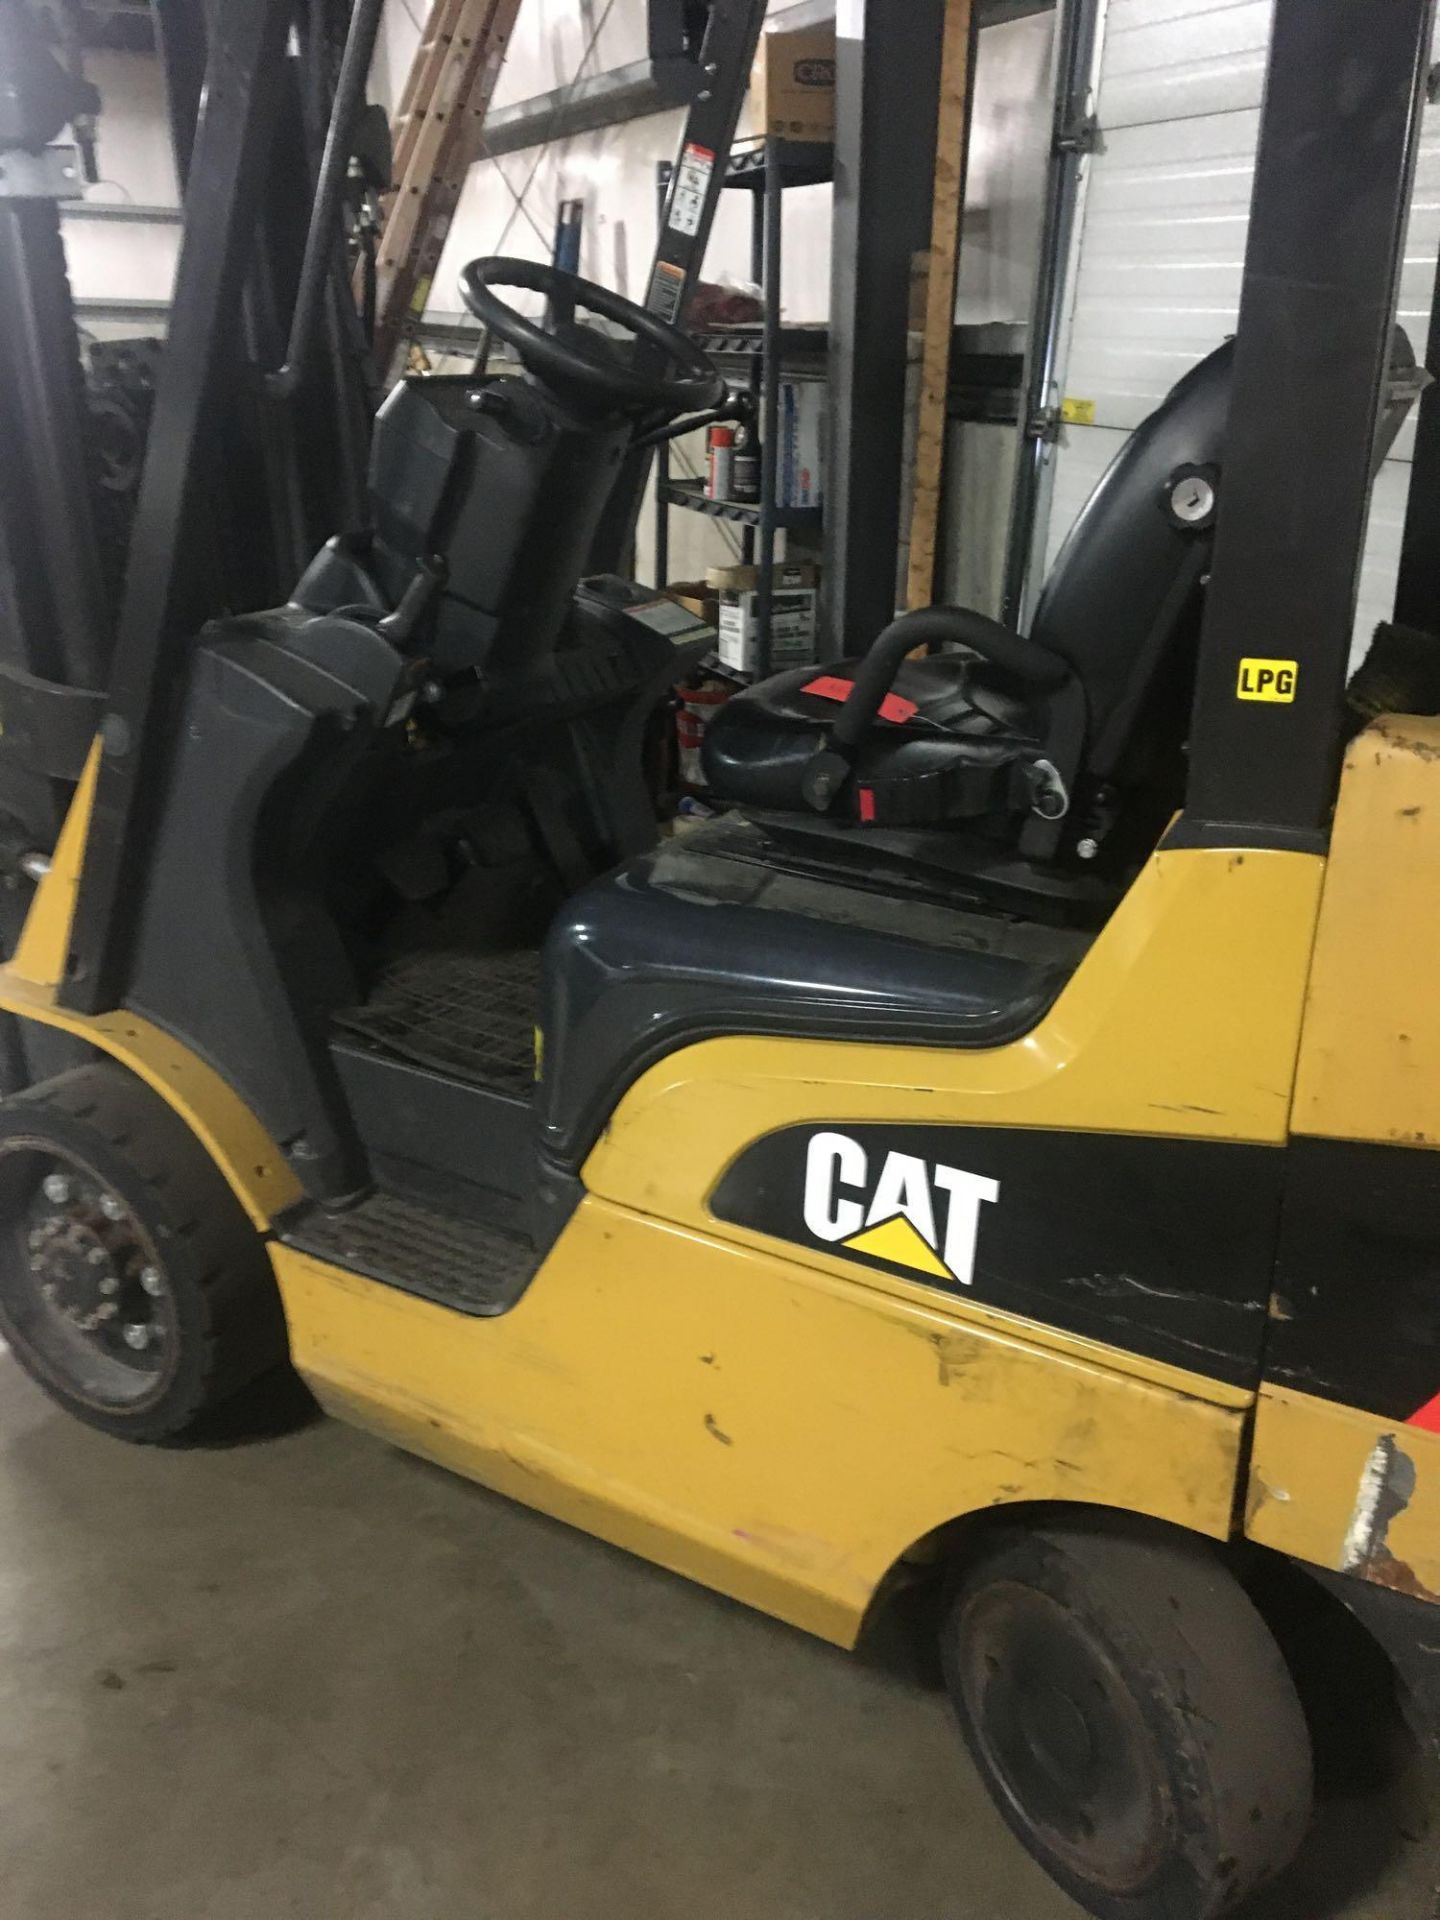 Propane Forklift, Caterpillar, 2C600, Max Ht 199", Max Cap 5150, Hrs 999 Started and Moved - Image 3 of 9